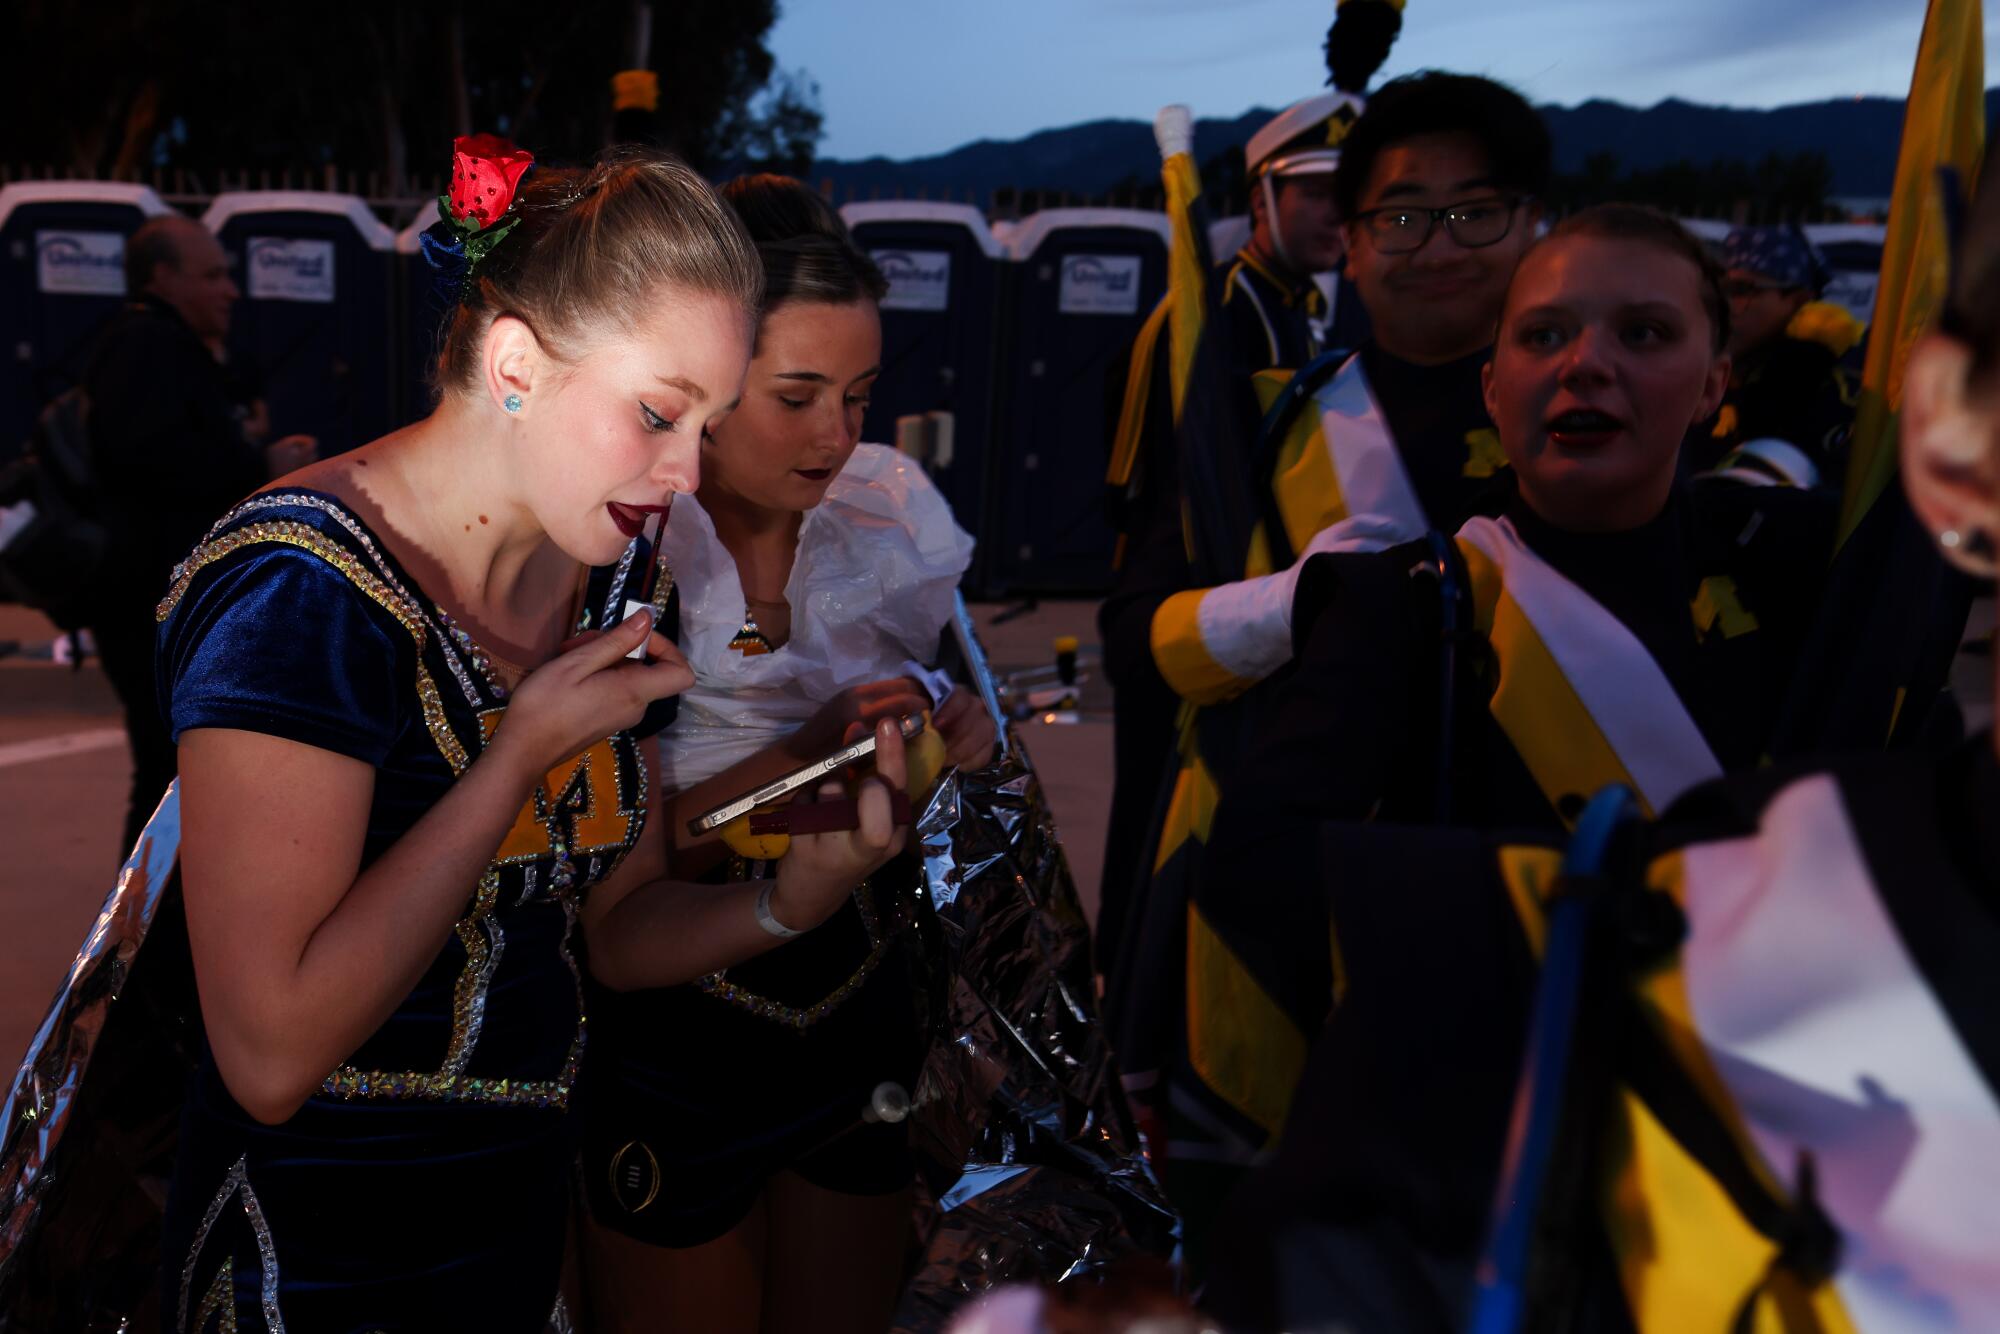 A Michigan Twirler puts on lipstick in the predawn darkness before the Rose Parade.